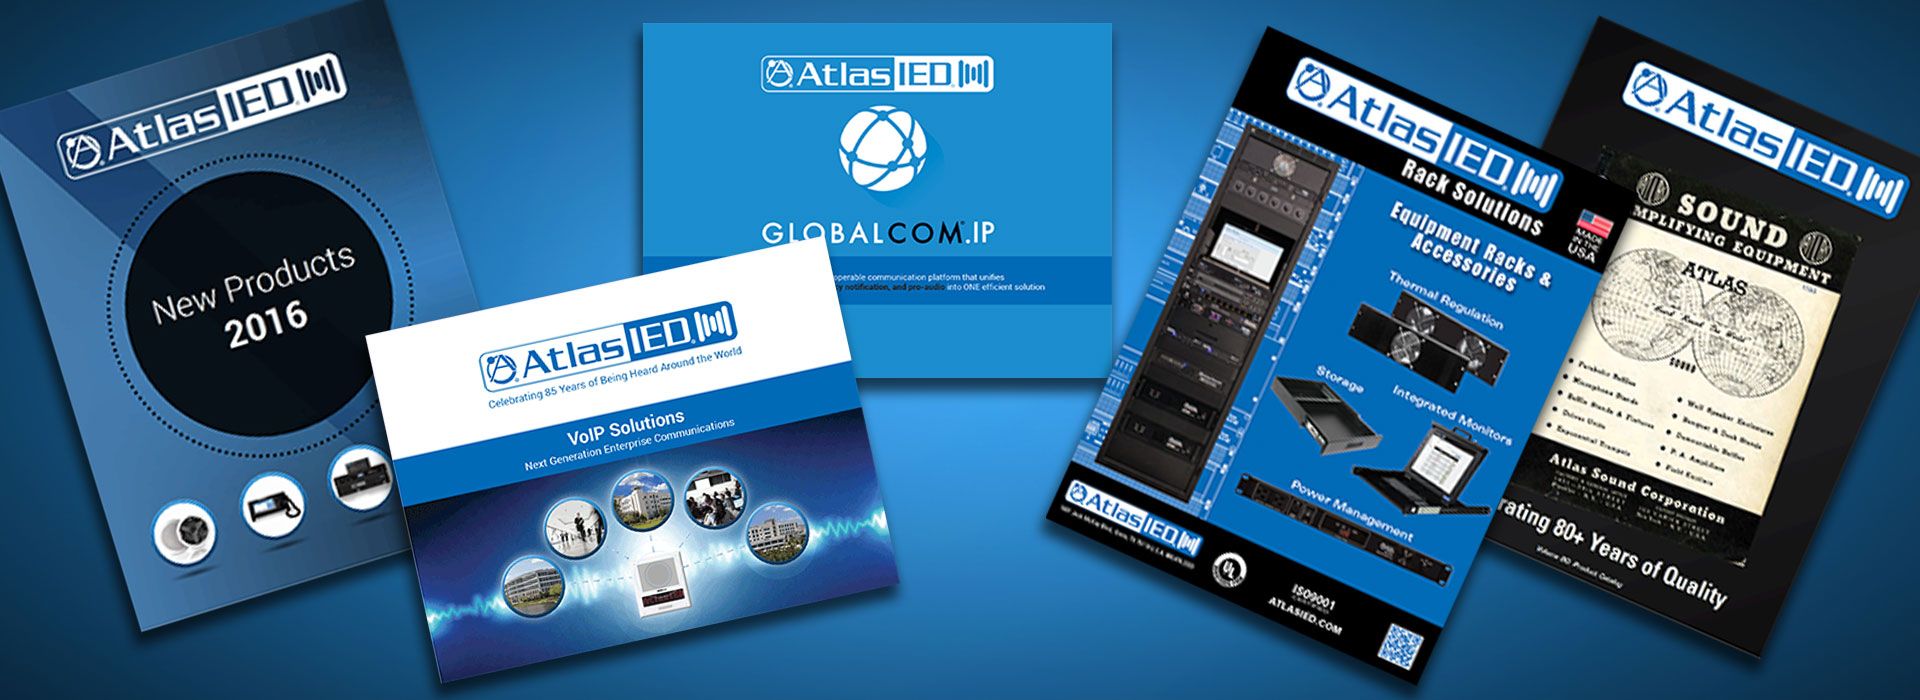 AtlasIED Catalogs & Brochures Available Online